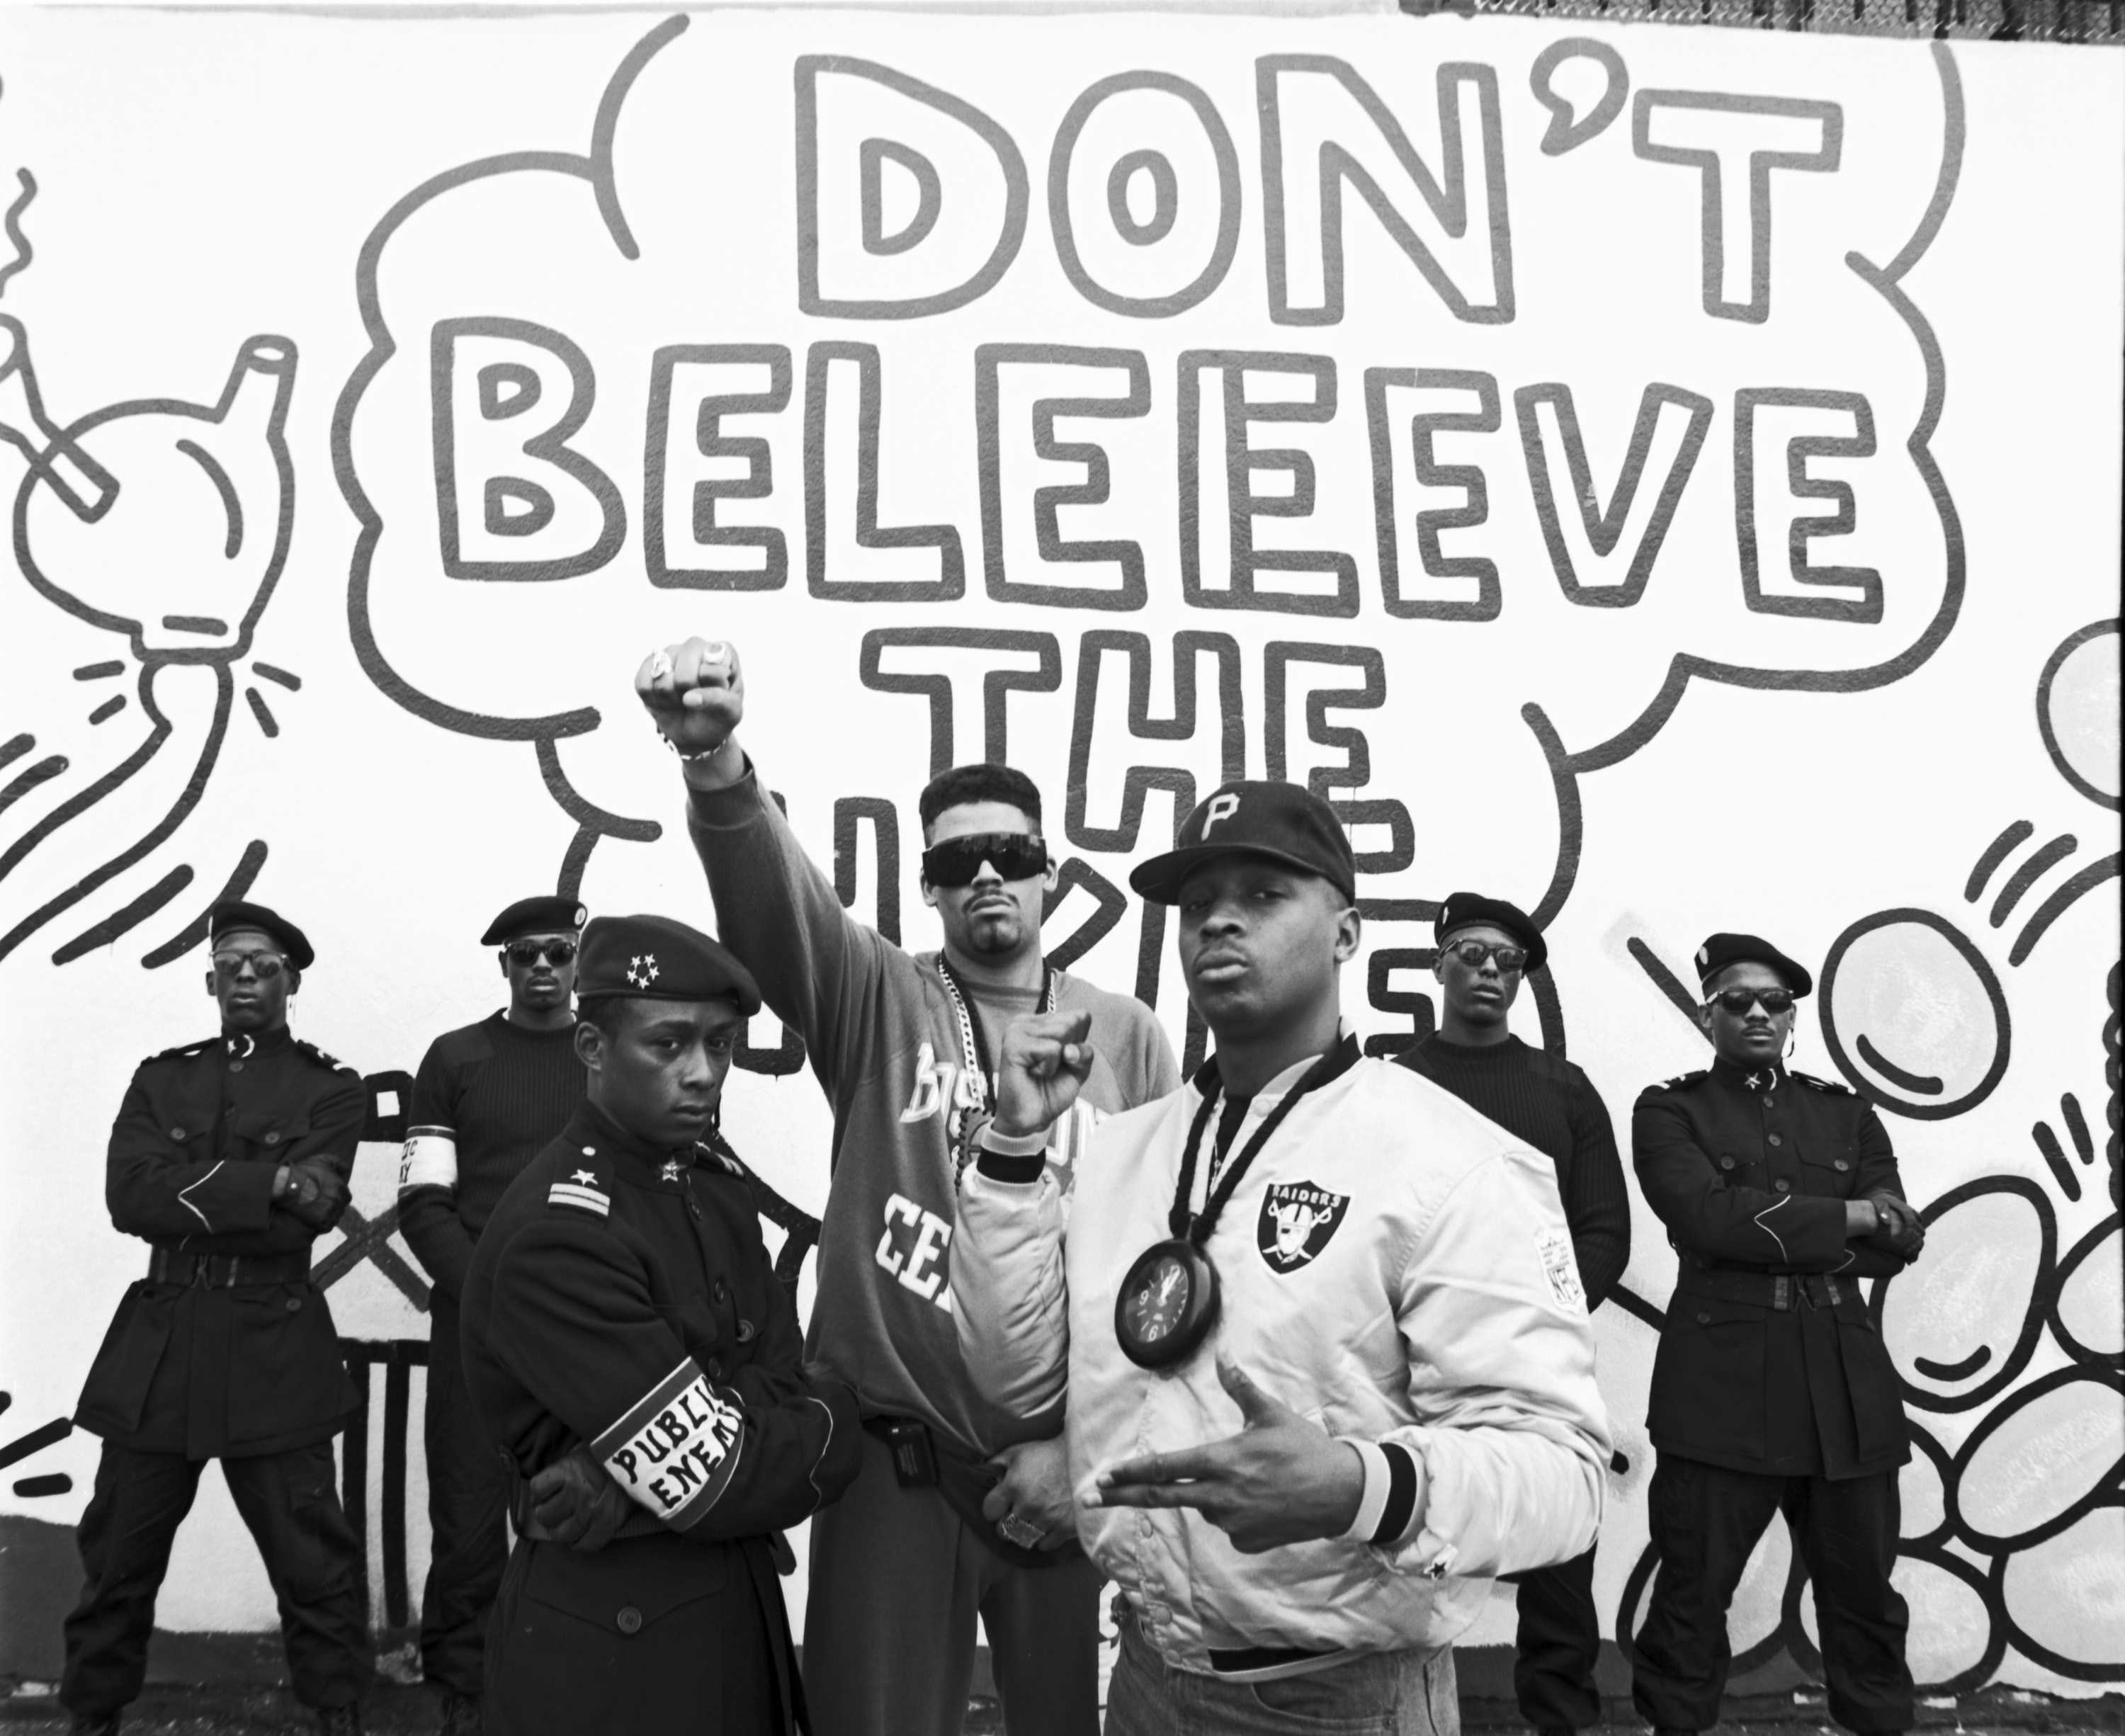 Public Enemy poses in front of a mural that says 'Don't Beleeve the...'